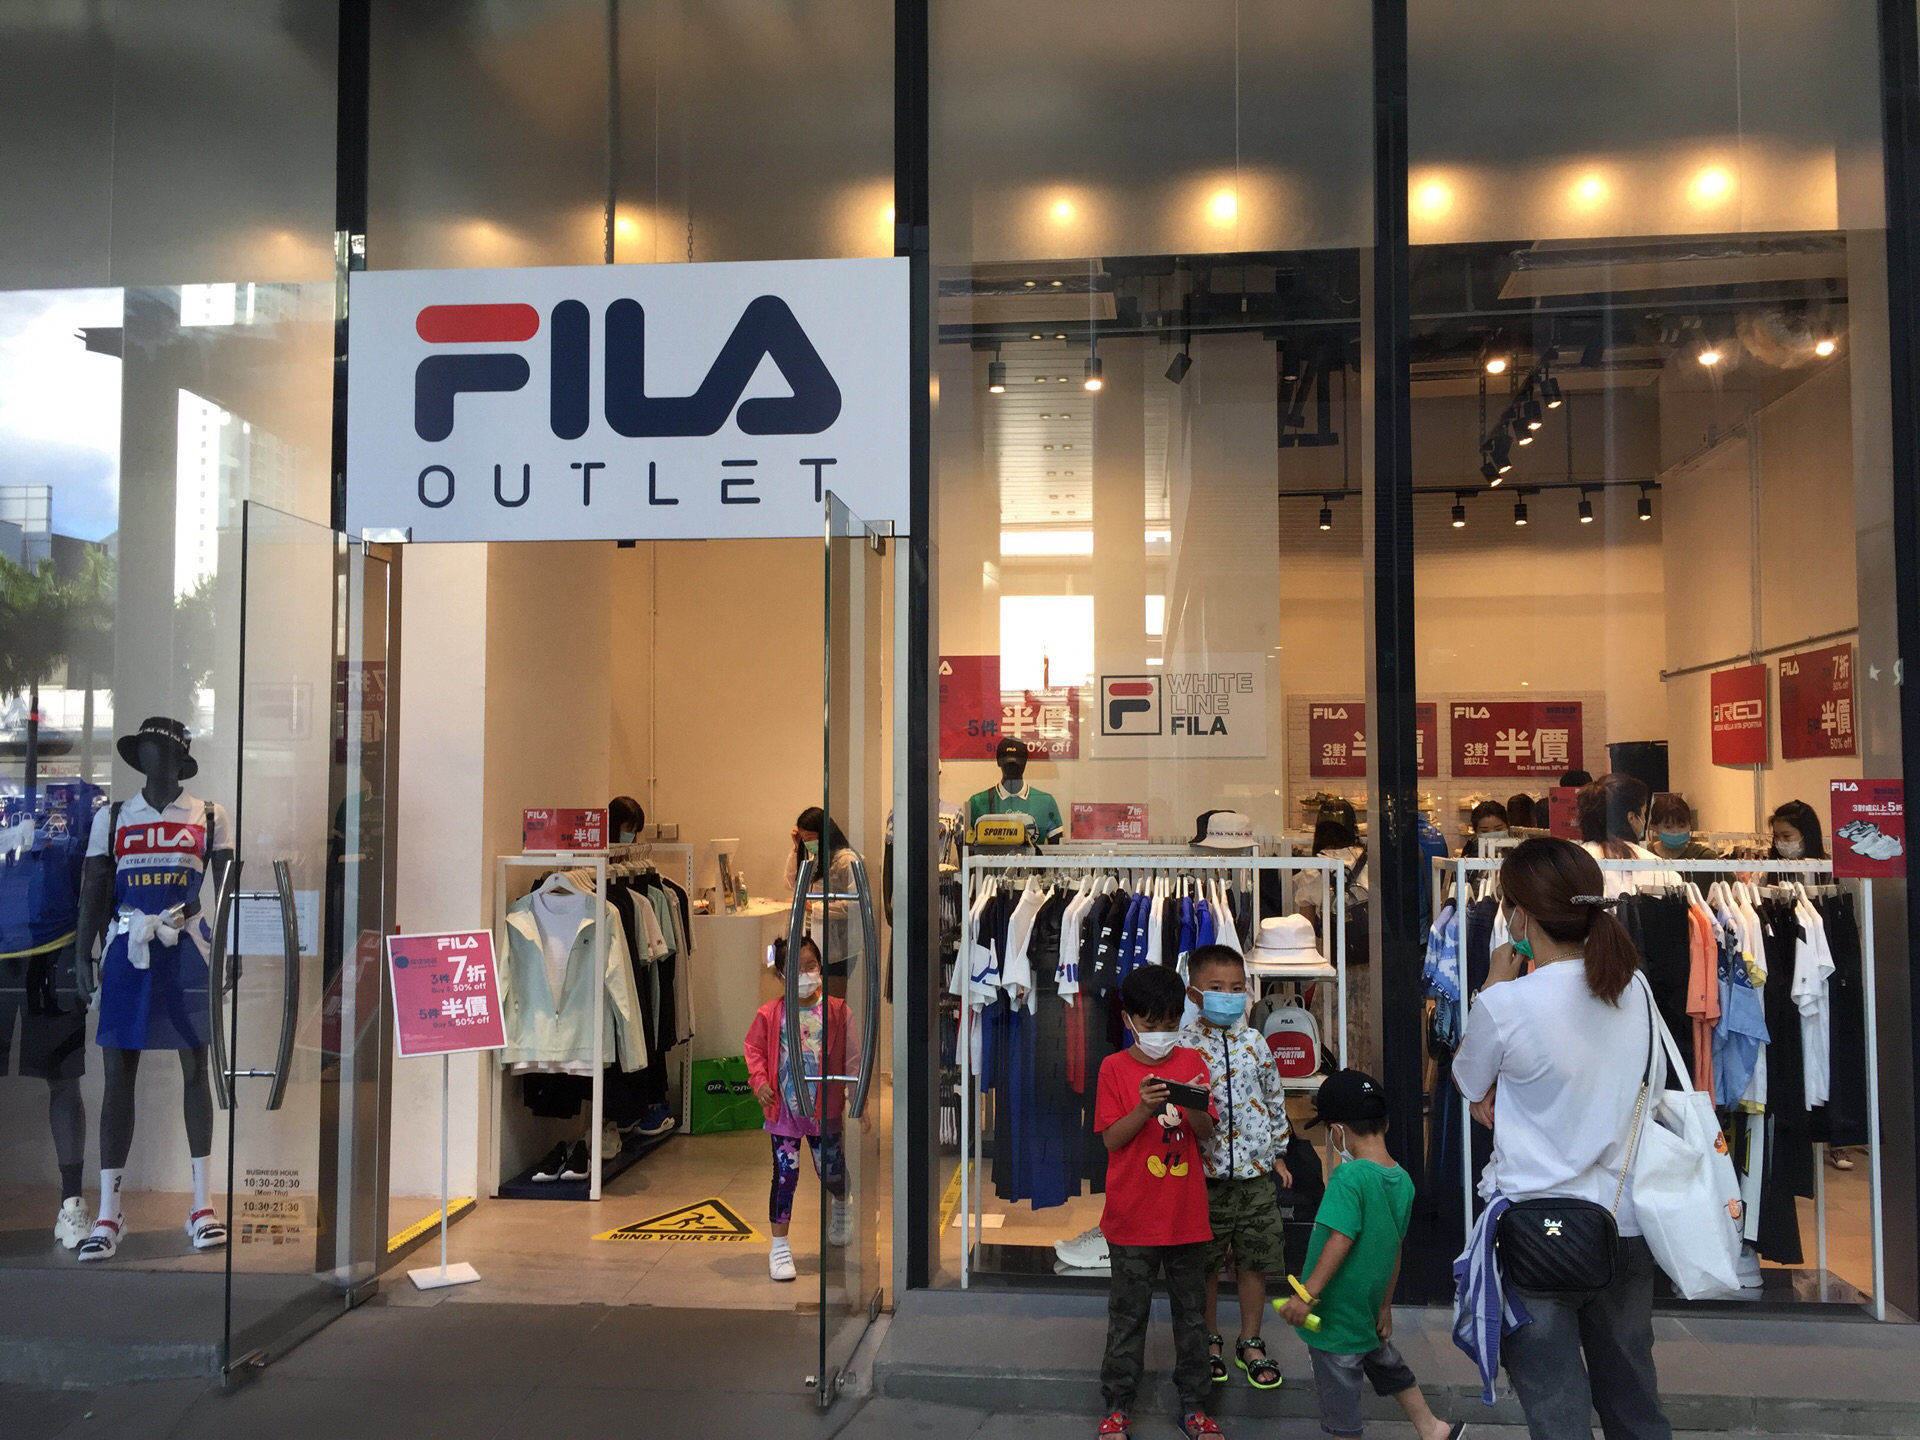 Versterken Extremisten Ideaal Shopping itineraries in Fila Outlet in July (updated in 2023) - Trip.com